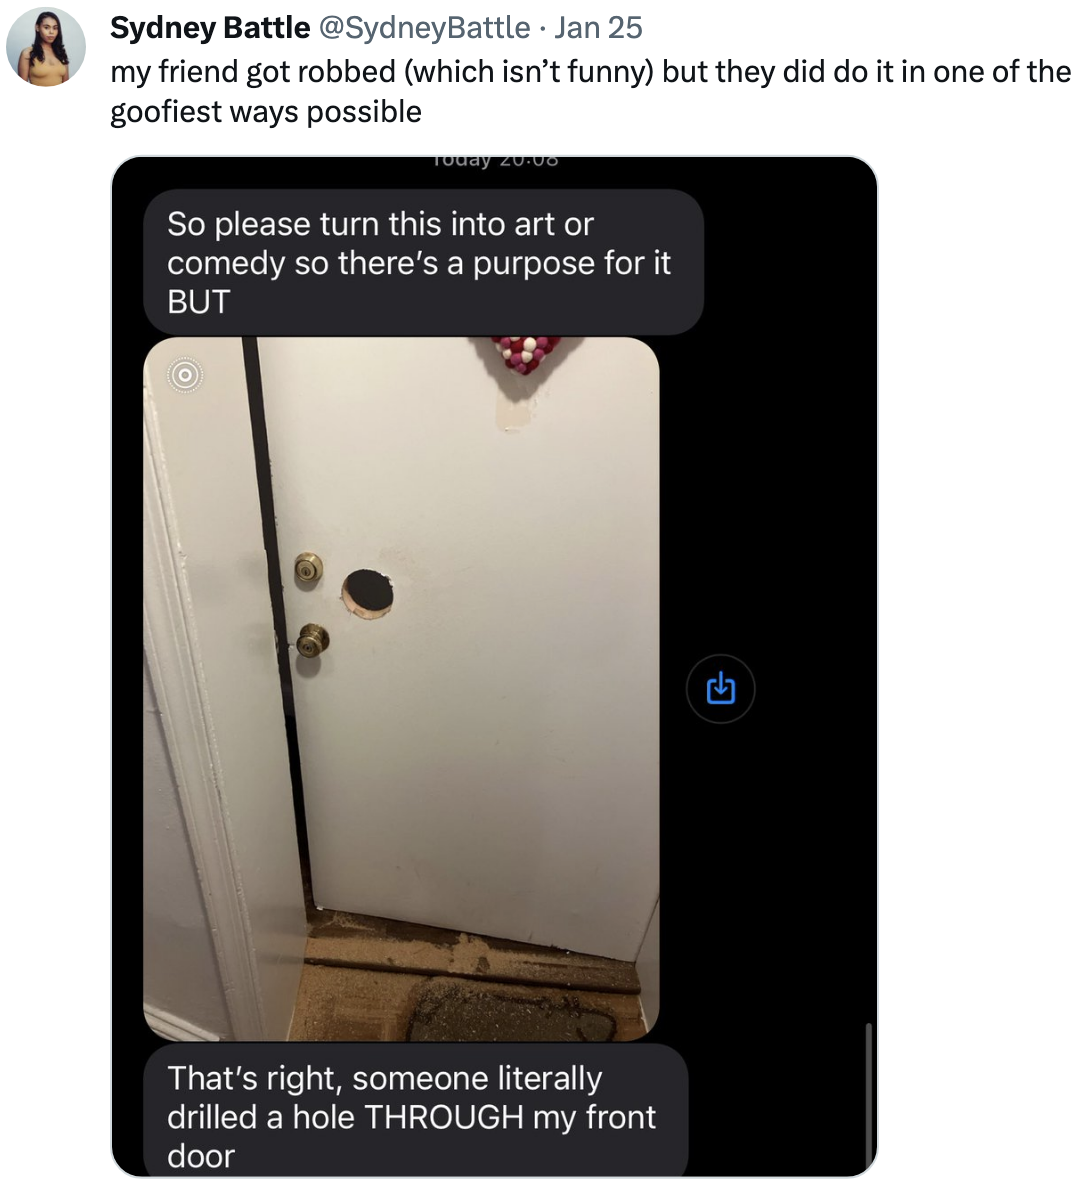 Person posts photo of friend&#x27;s door with a large hole by the locks, saying they were robbed &quot;in the goofiest way&quot;: Someone drilled a hole right through their front door